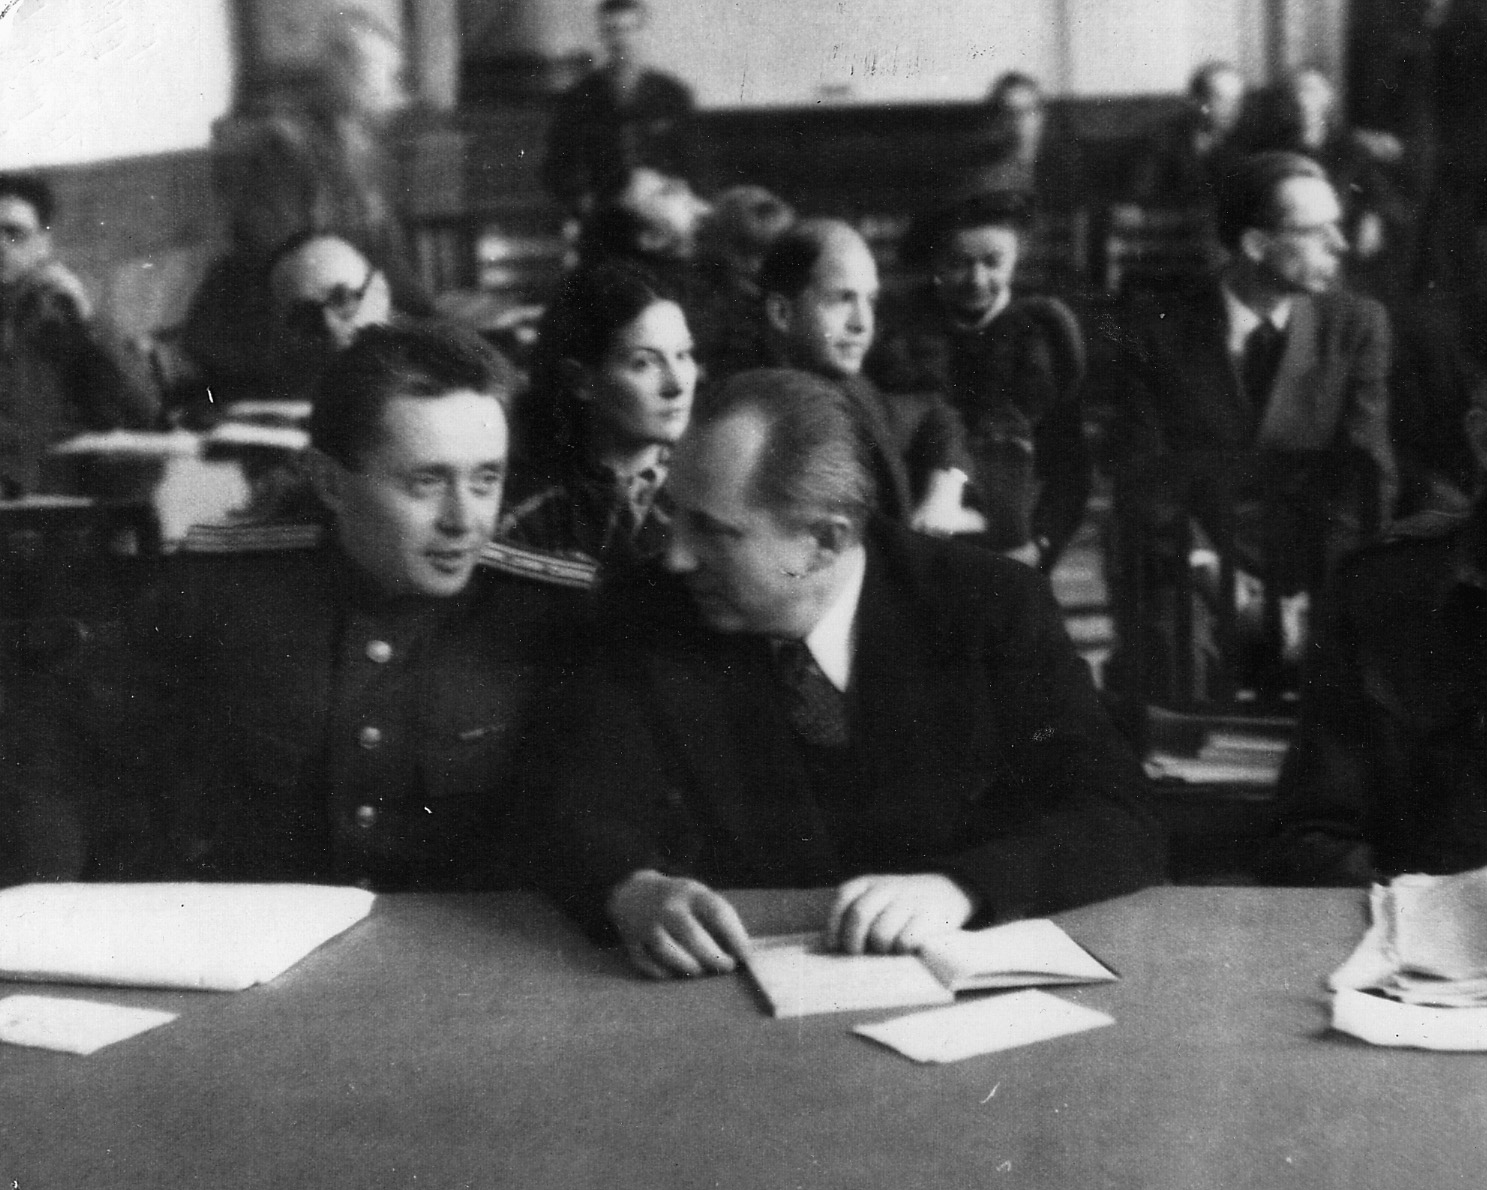 Russian chief prosecutor R.A. Rudenko relied heavily on incriminating documents to make the case against Göring.